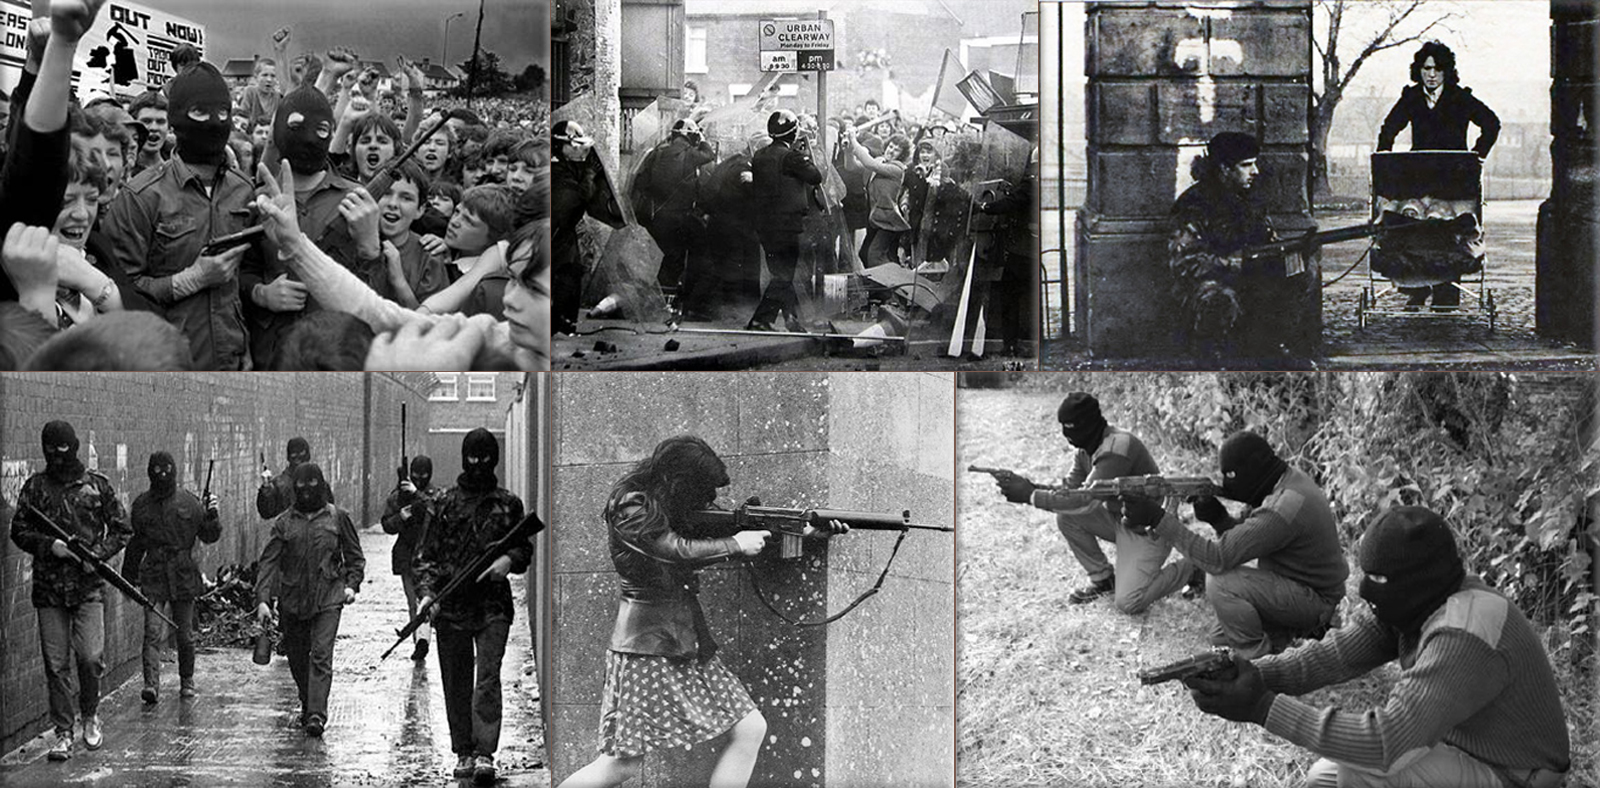 The Provisional Irish Republican Army calls an end to its thirty year long armed campaign in Northern Ireland